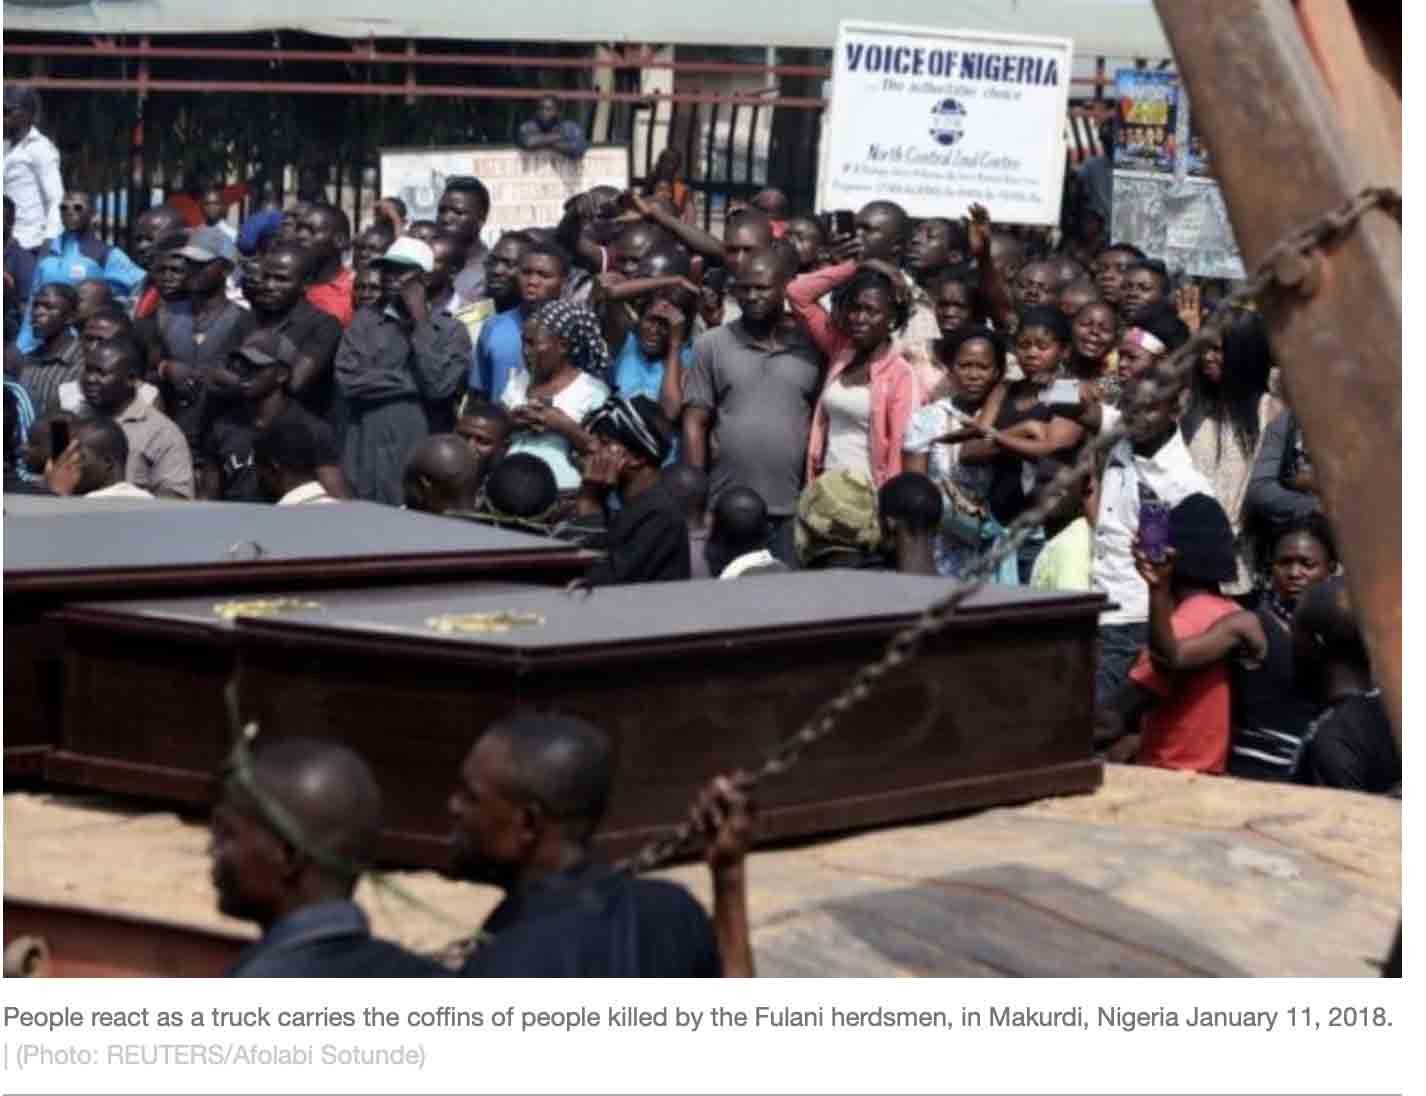 120 Christians Killed in Nigeria in 3 Weeks, 90,000 Christians Killed in 2018